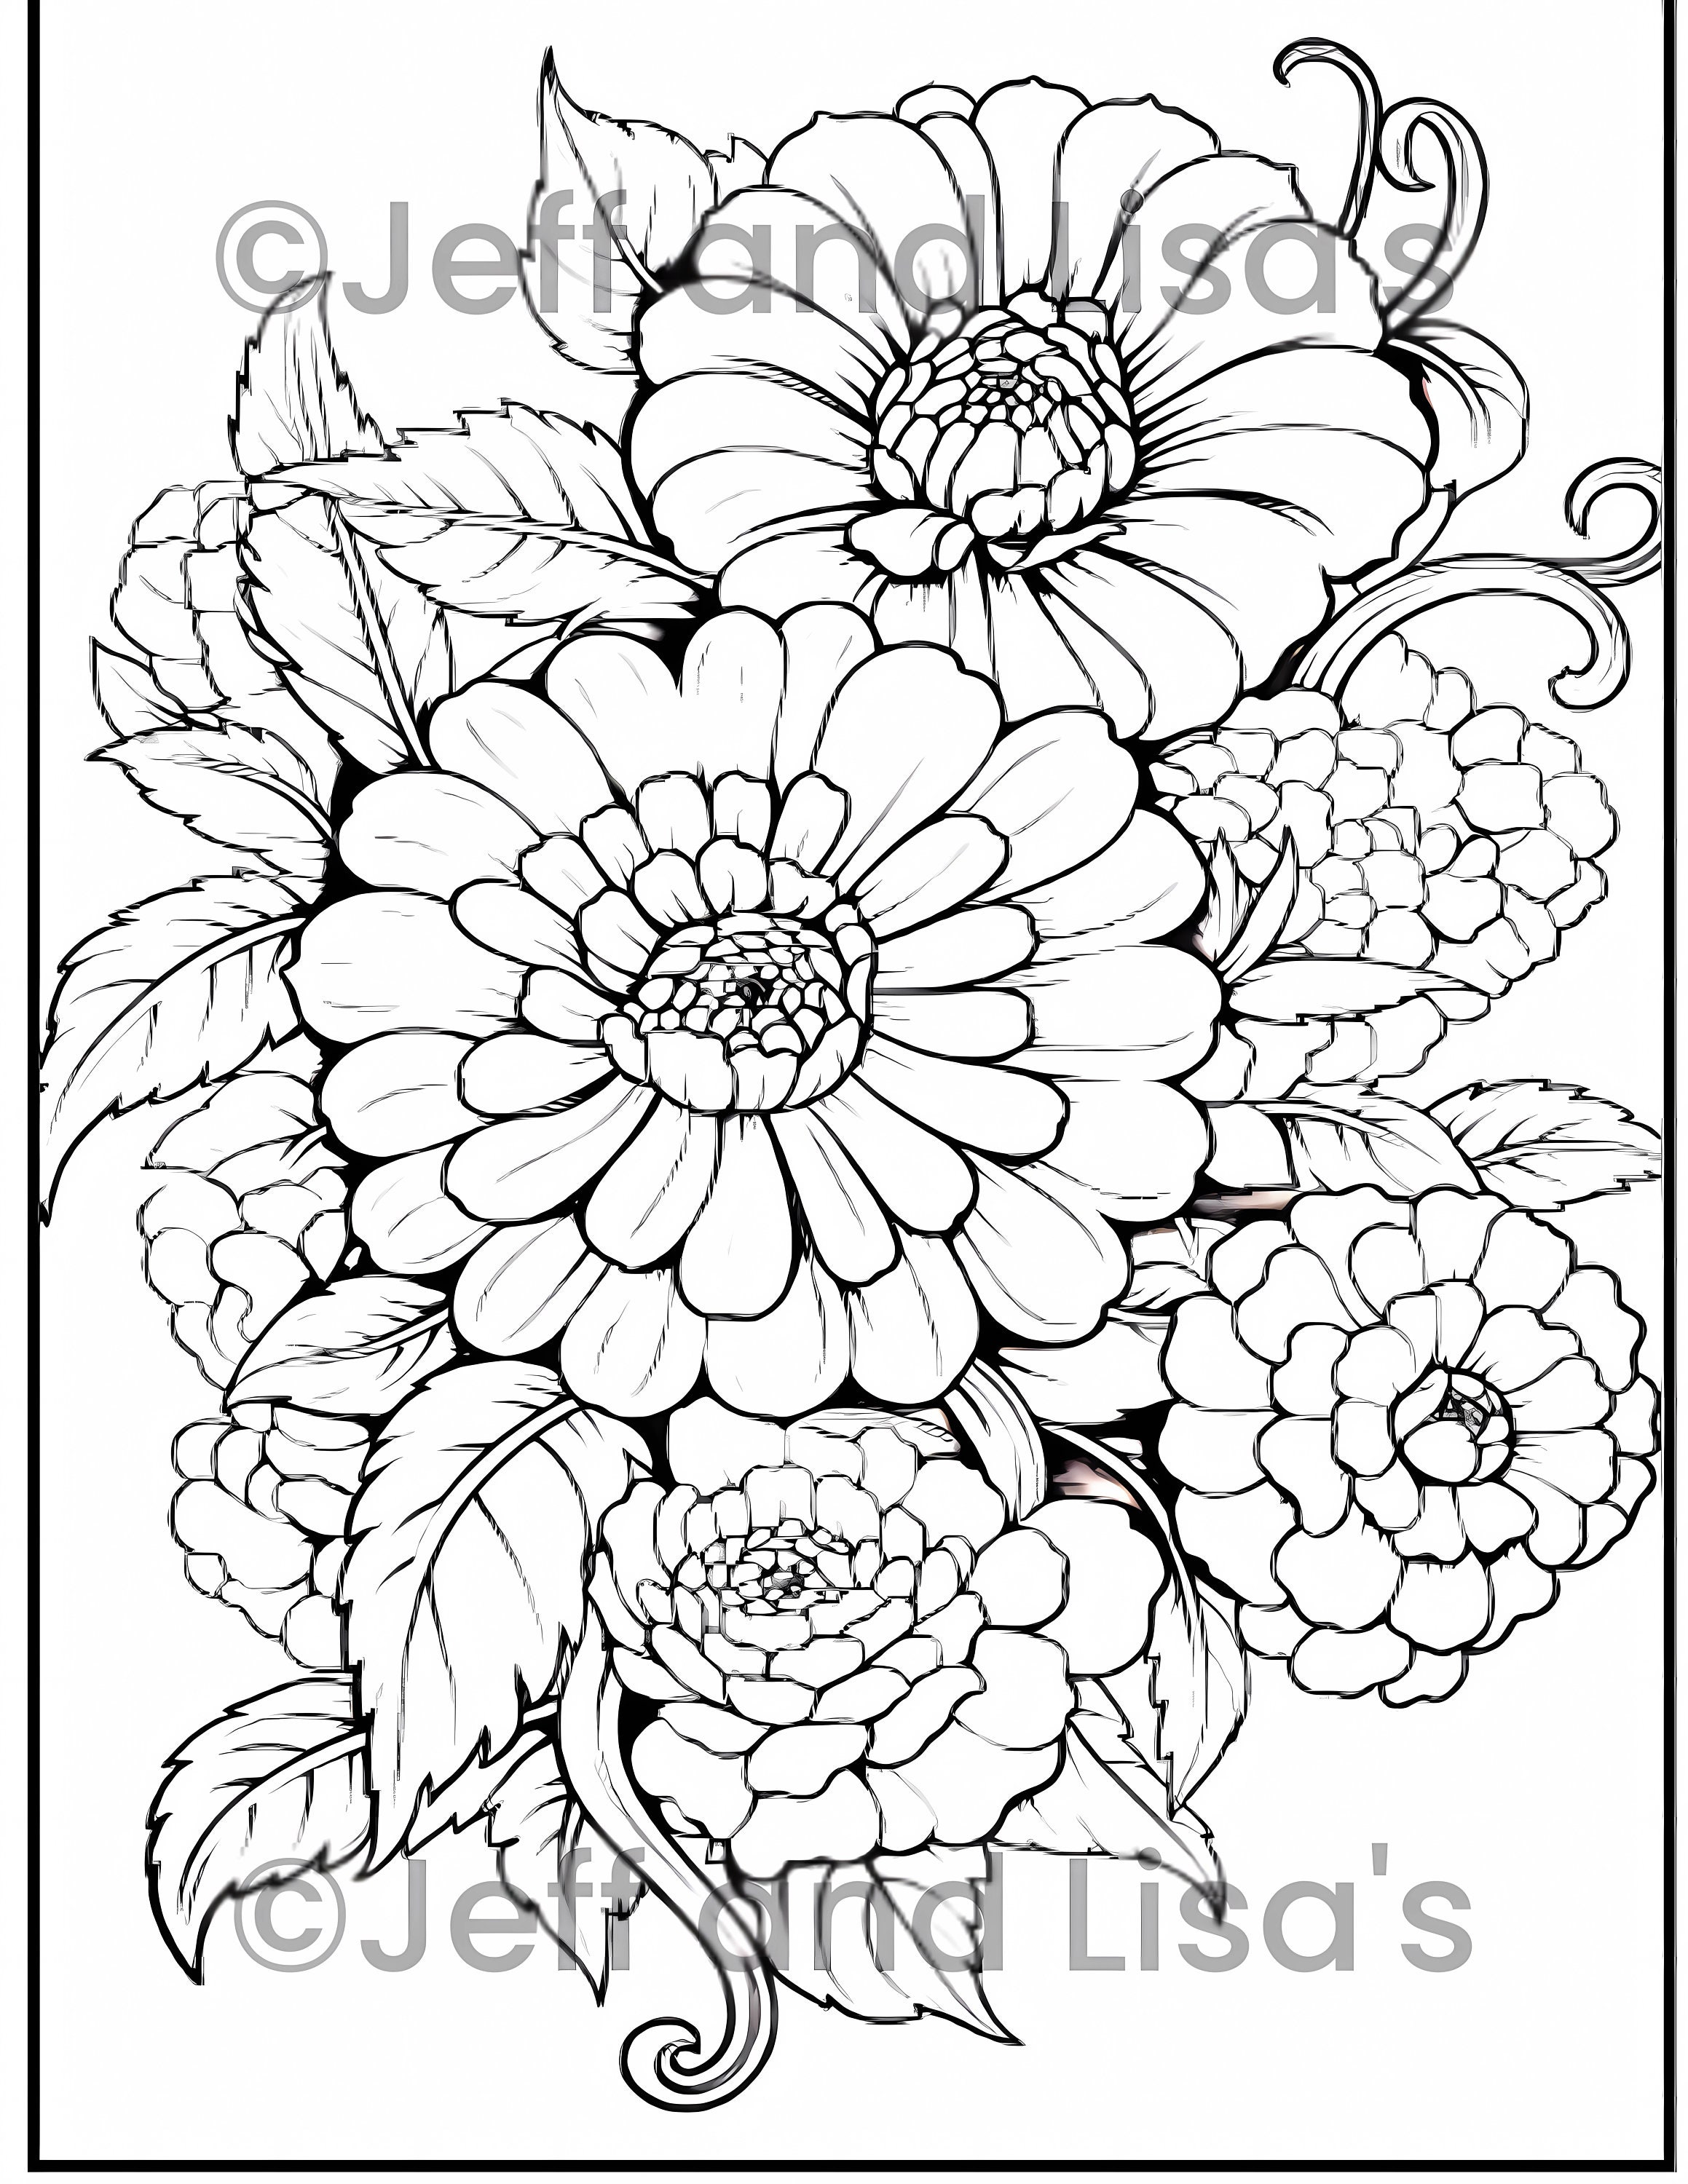 Stress Relief Flower Coloring Book For Adults, Book by Callisto Publishing, Official Publisher Page